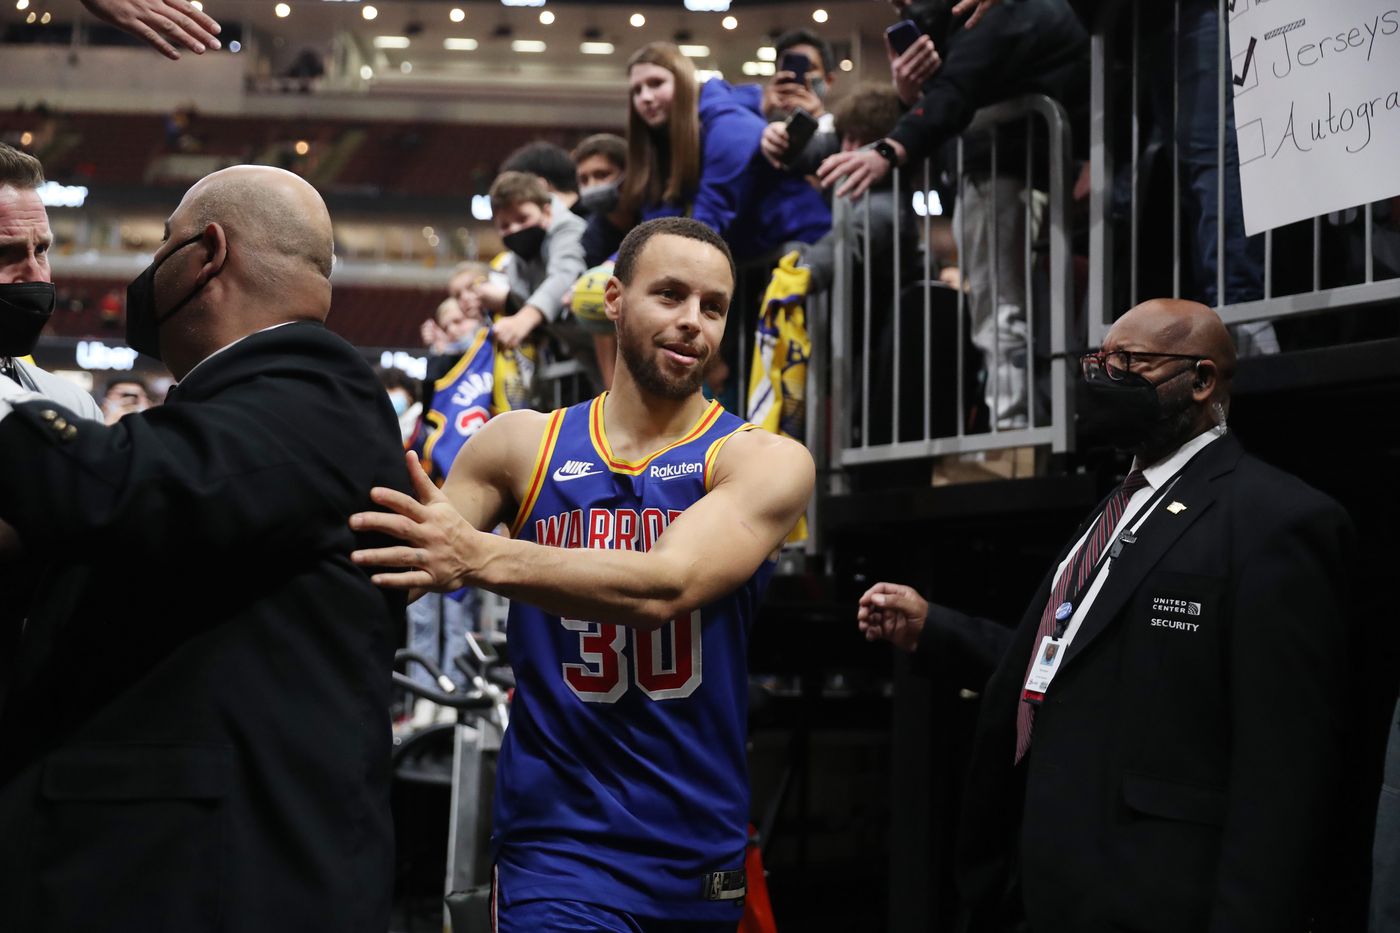 Golden State Warriors guard Stephen Curry (30) maneuvers past security on his way to the locker room after a 138-96 win over the Chicago Bulls at United Center on Jan. 14, 2022, in Chicago.